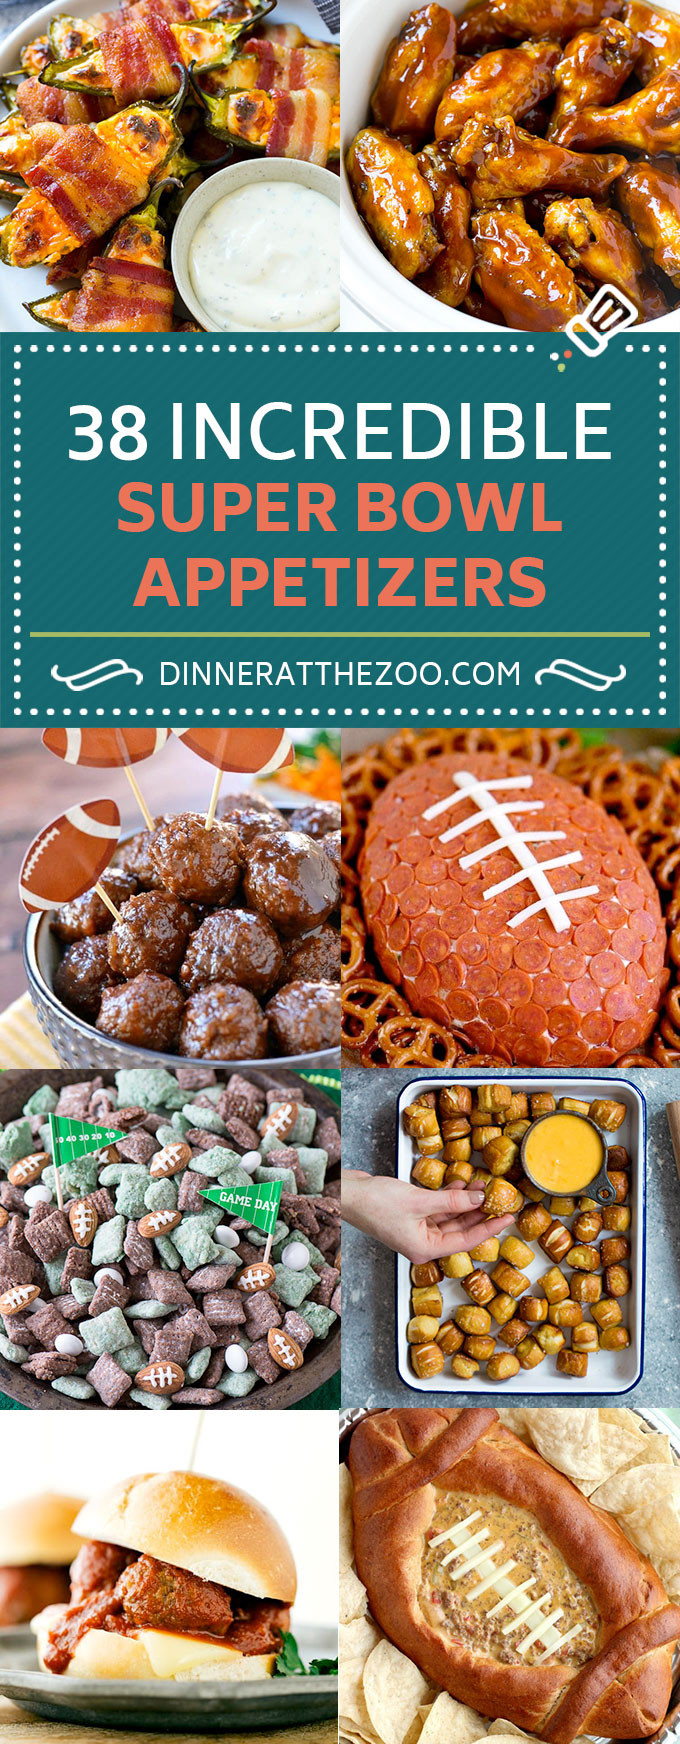 Best Super Bowl Food Recipes
 45 Incredible Super Bowl Appetizer Recipes Dinner at the Zoo